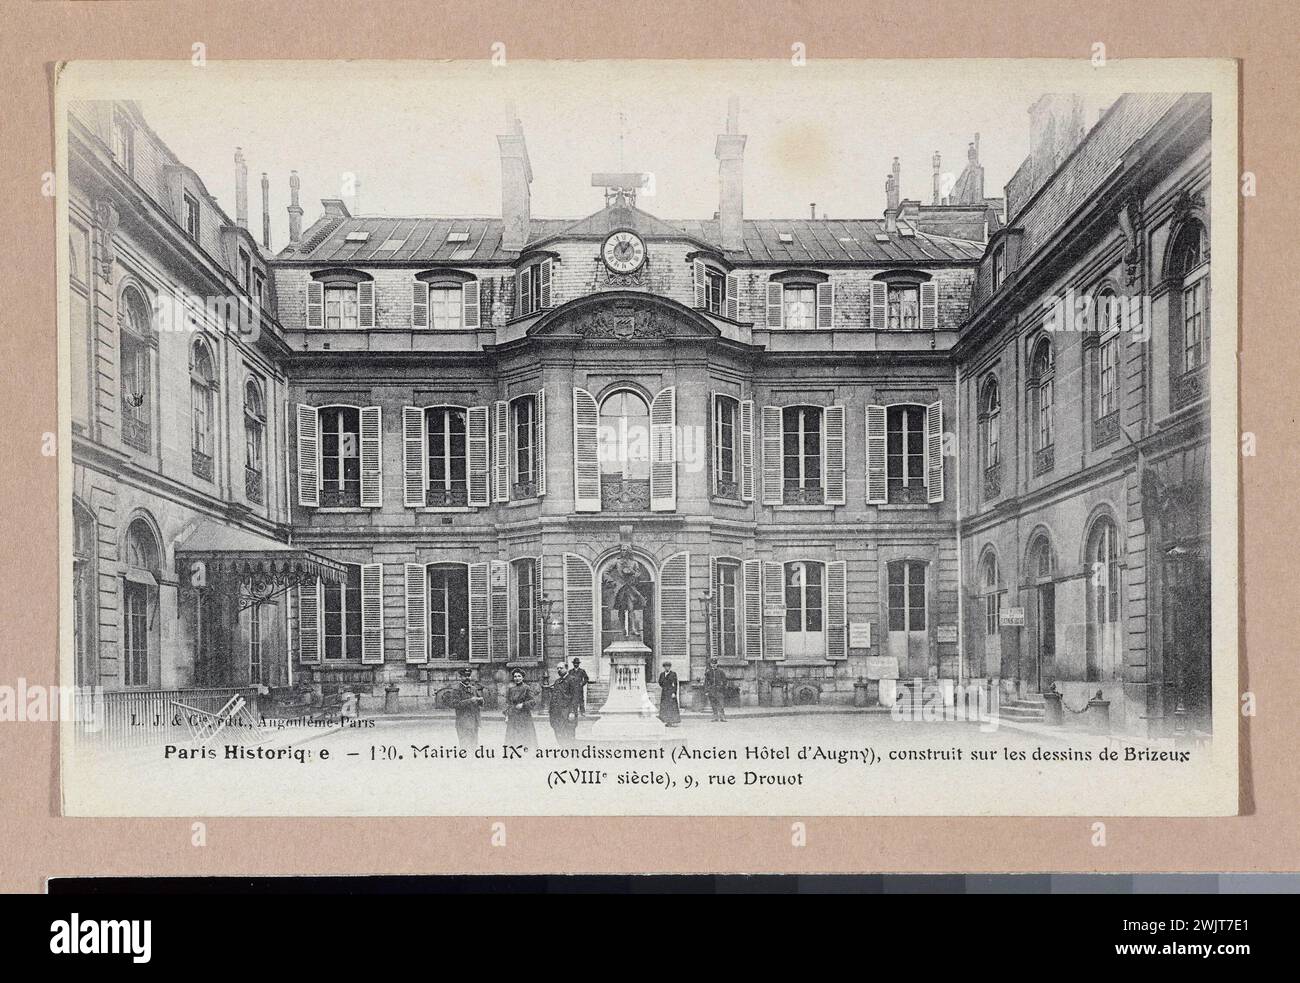 Town hall of the 9th arrondissement (former Hôtel d'A Augny), built on the drawings of Brizeux (18th century), 9 rue Drouot '. Paris, Carnavalet museum. Stock Photo